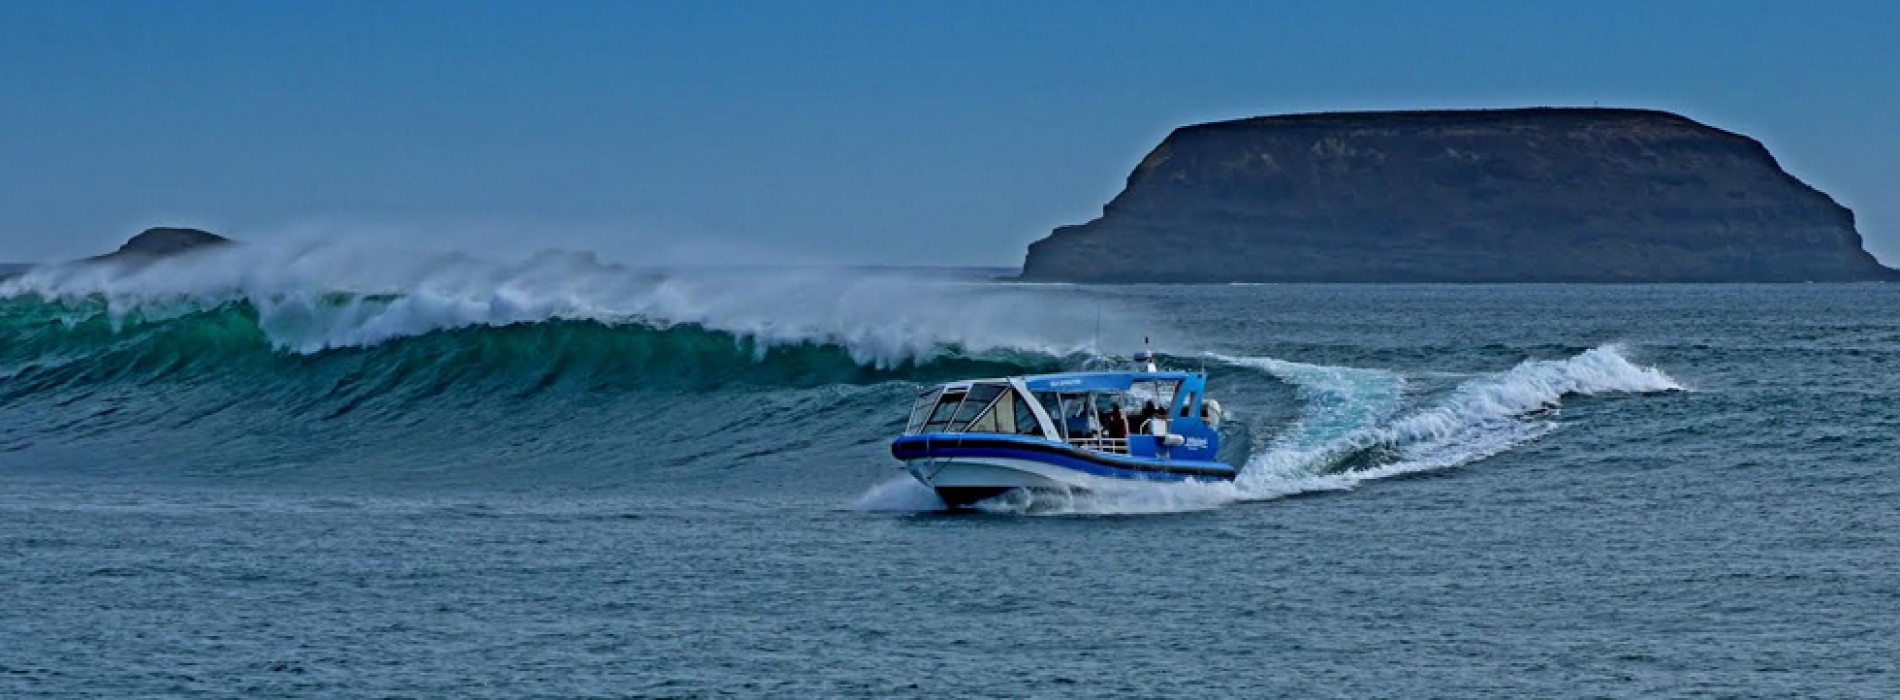 Top 8 reasons to visit Phillip Island